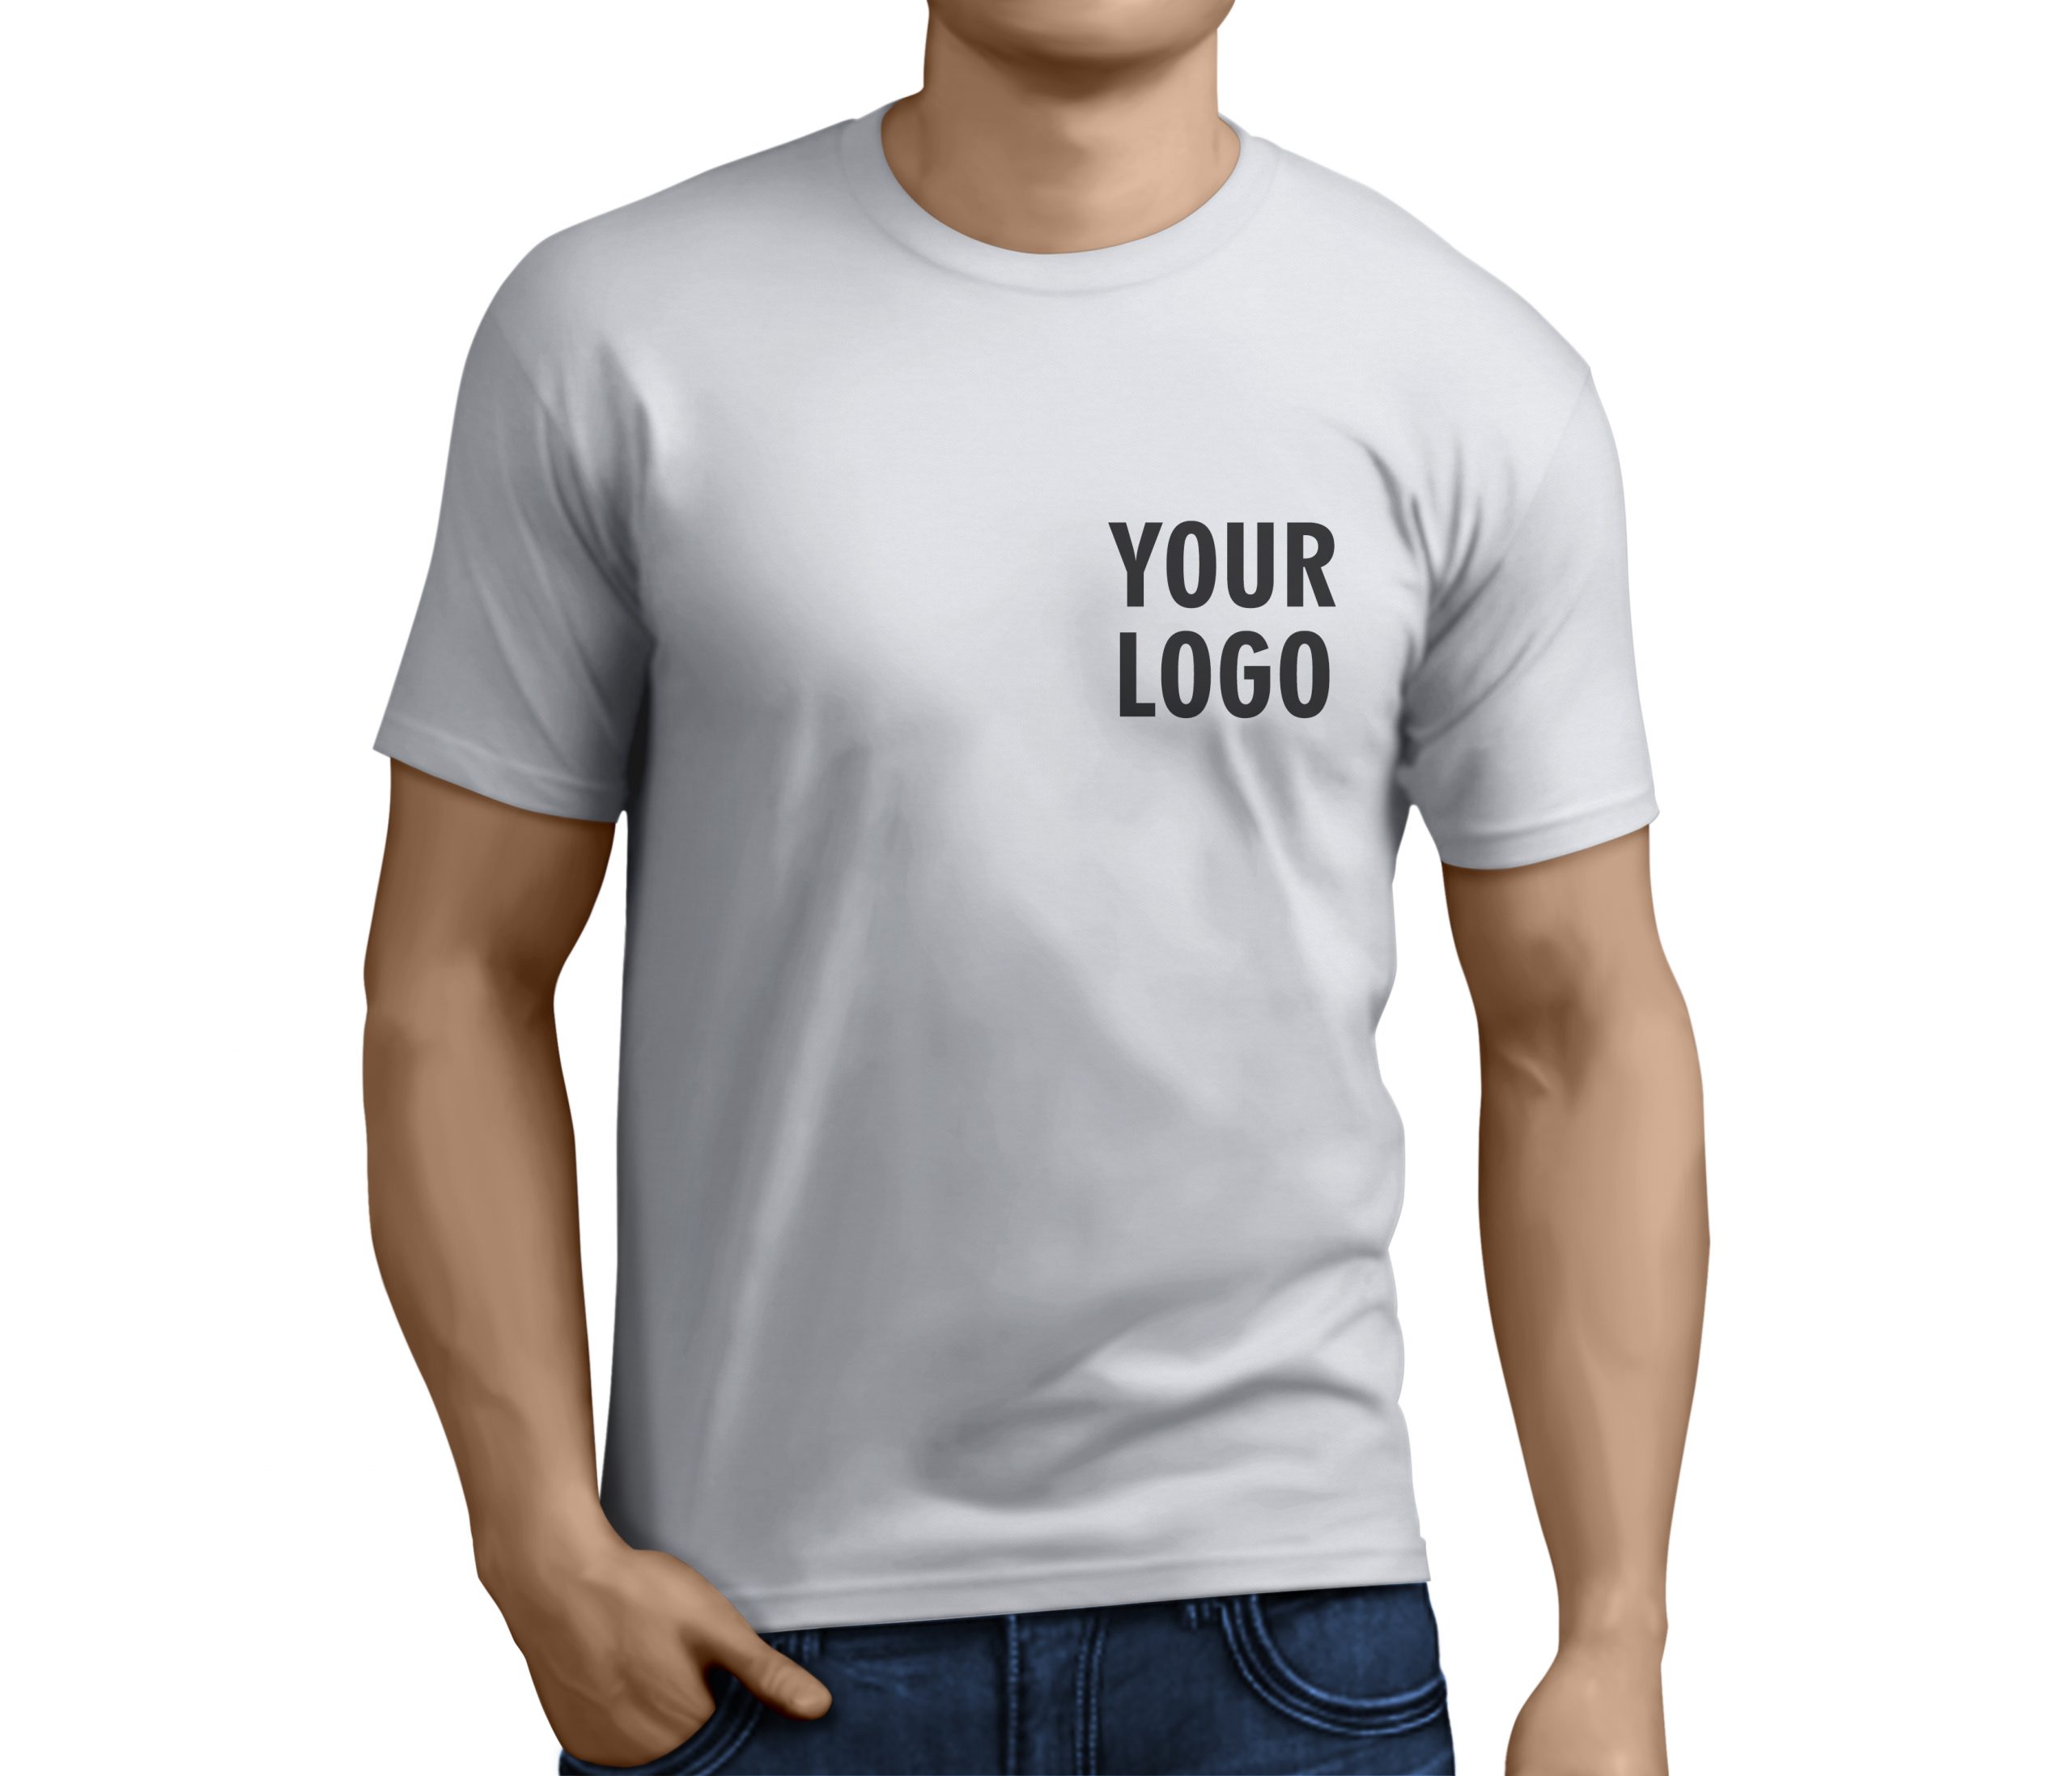 Buy a Customised T-shirt that consists of your logo and your name/tagline!